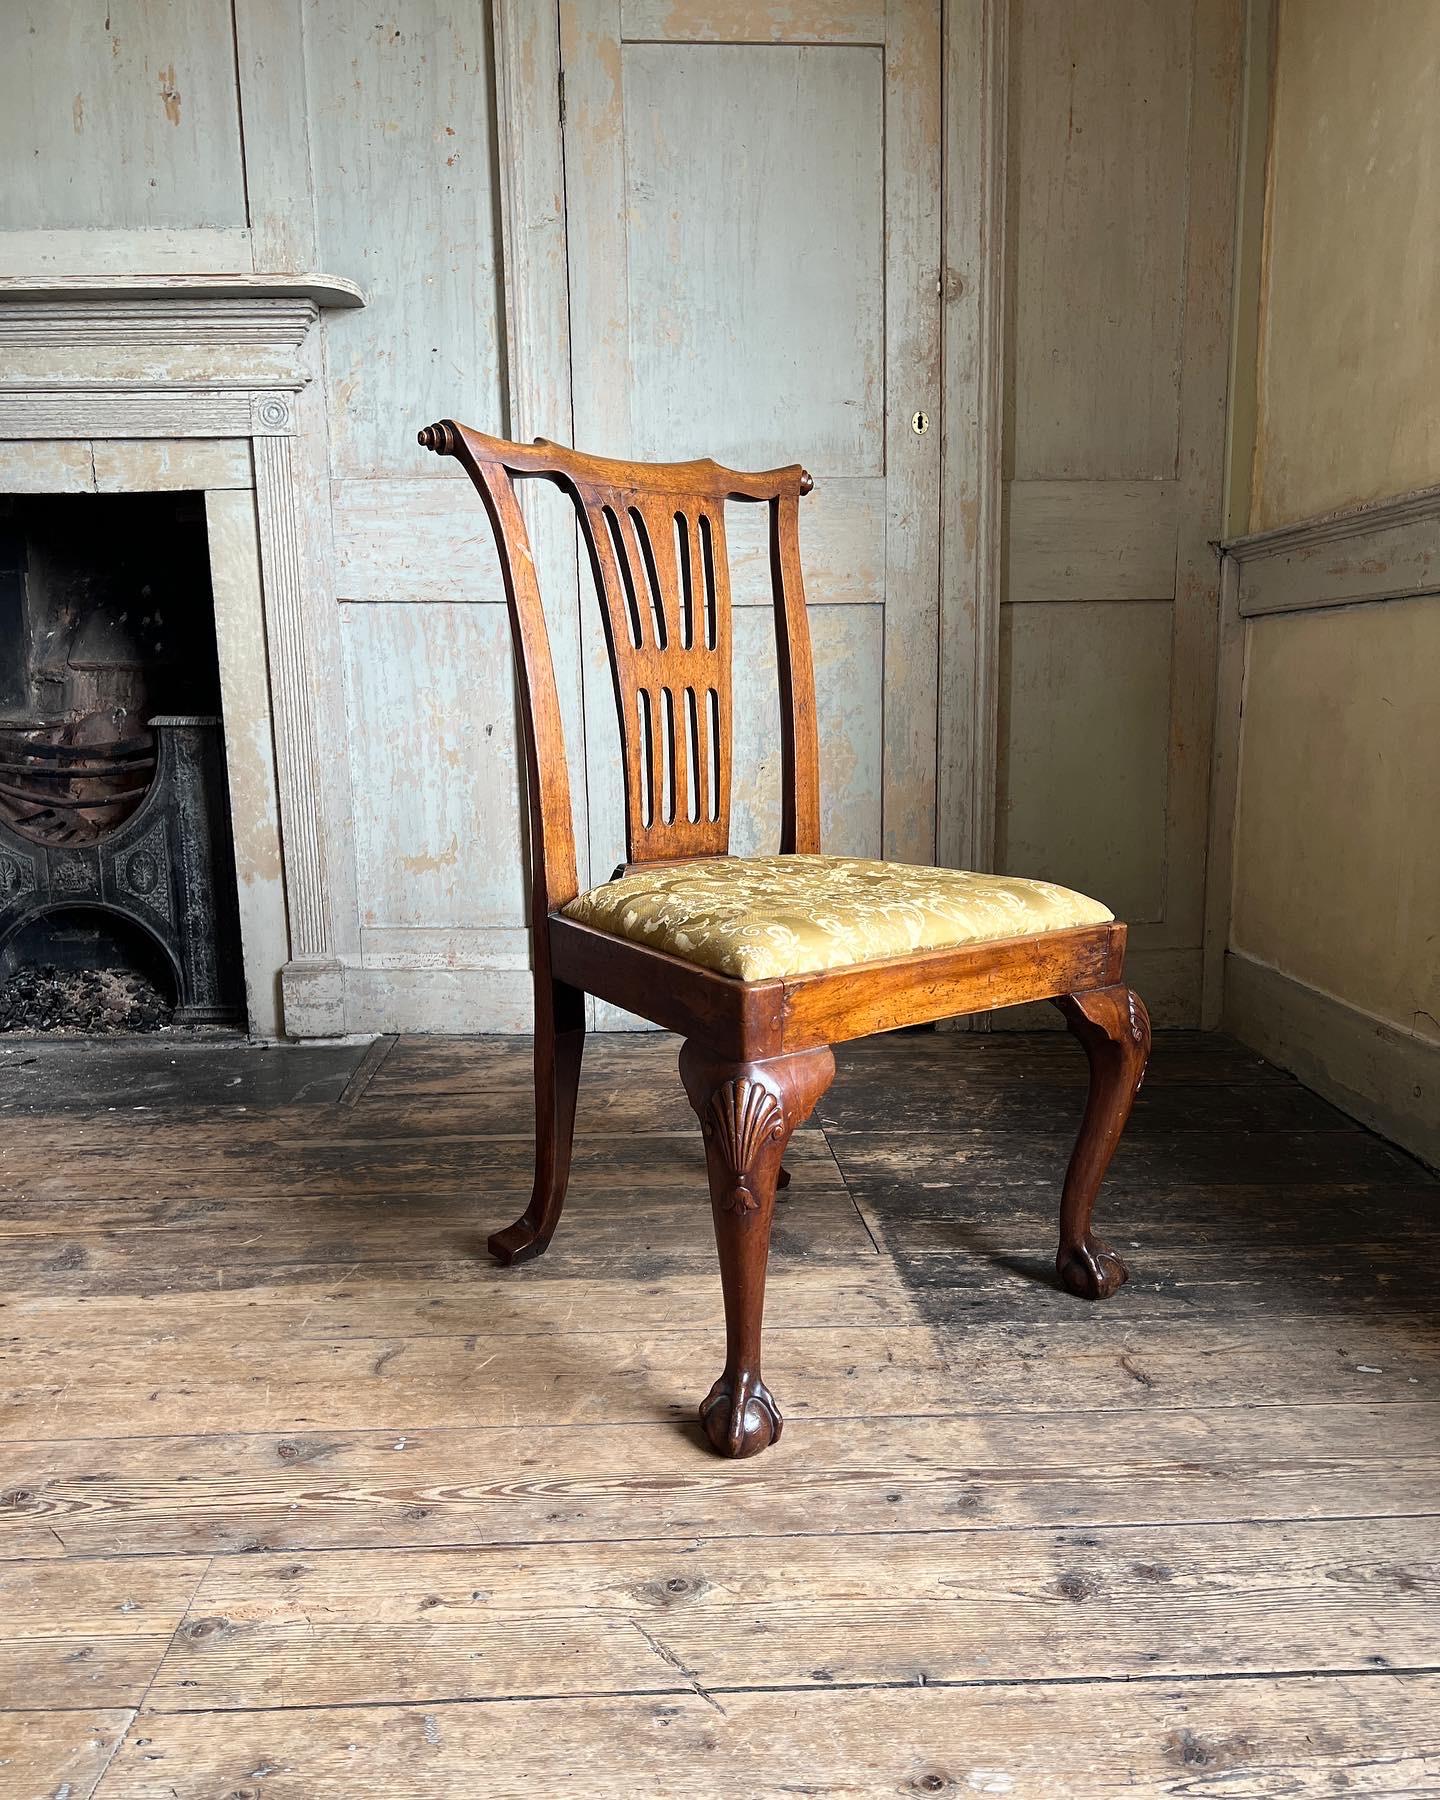 An elegant George II walnut side chair with scrolled crest rail, pierced splat and shell carved cabriole legs. C.1730. Similar chair designs have been made by William Kent.

Measures - 94cm H x 56cm D x 61cm W x 44cm Seat Height.